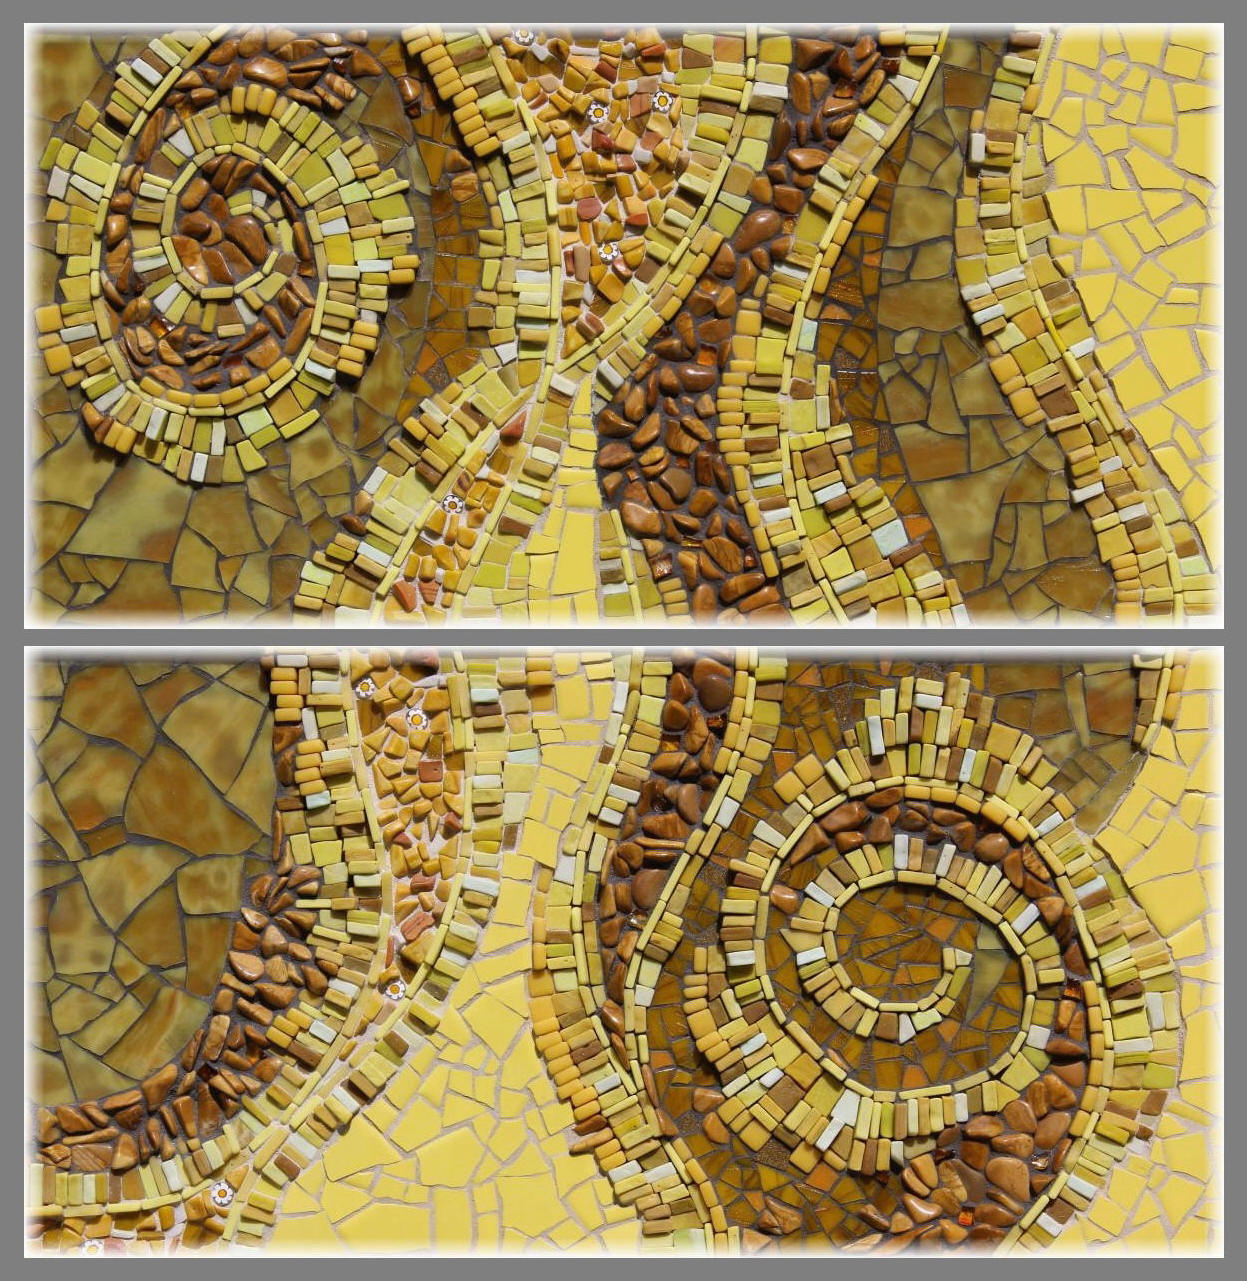 mosaic in shades of yellow and brown dominated by curved shapes and spirals in the upper left and lower right